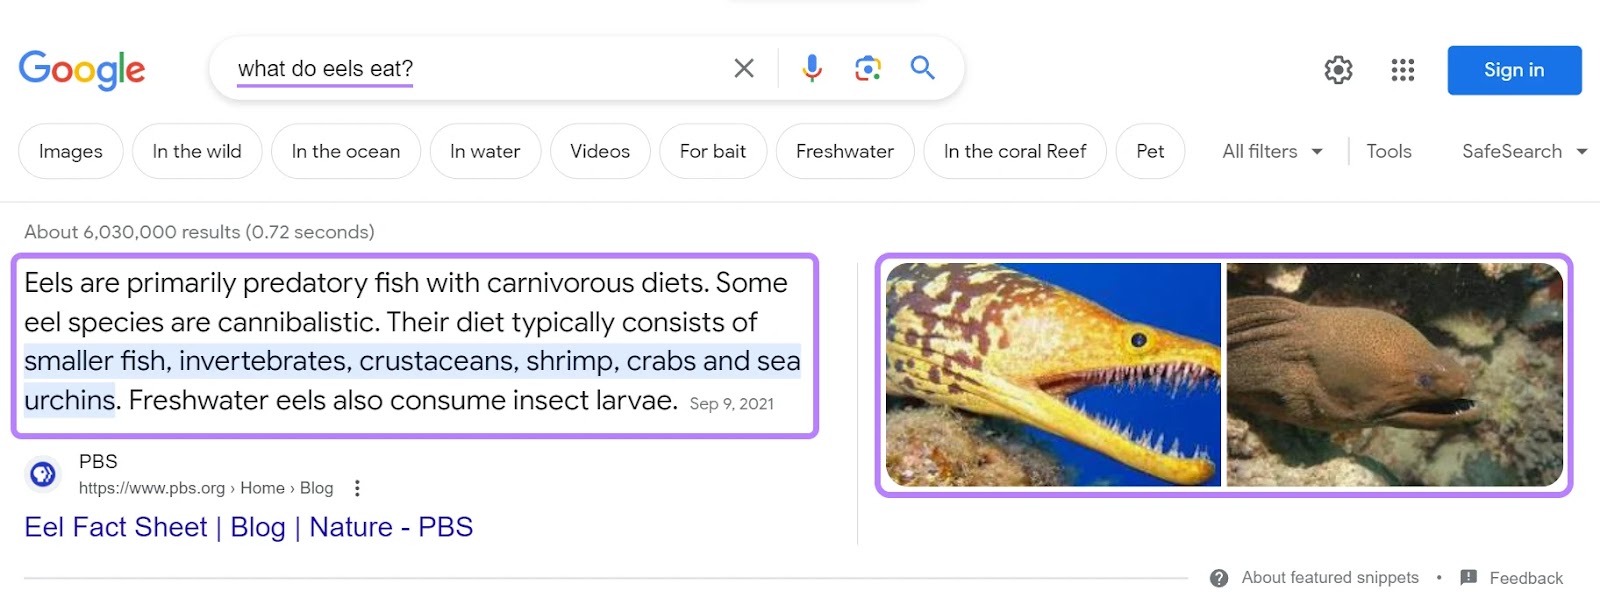 A featured snippet on Google's SERP for "what do eels eat" query